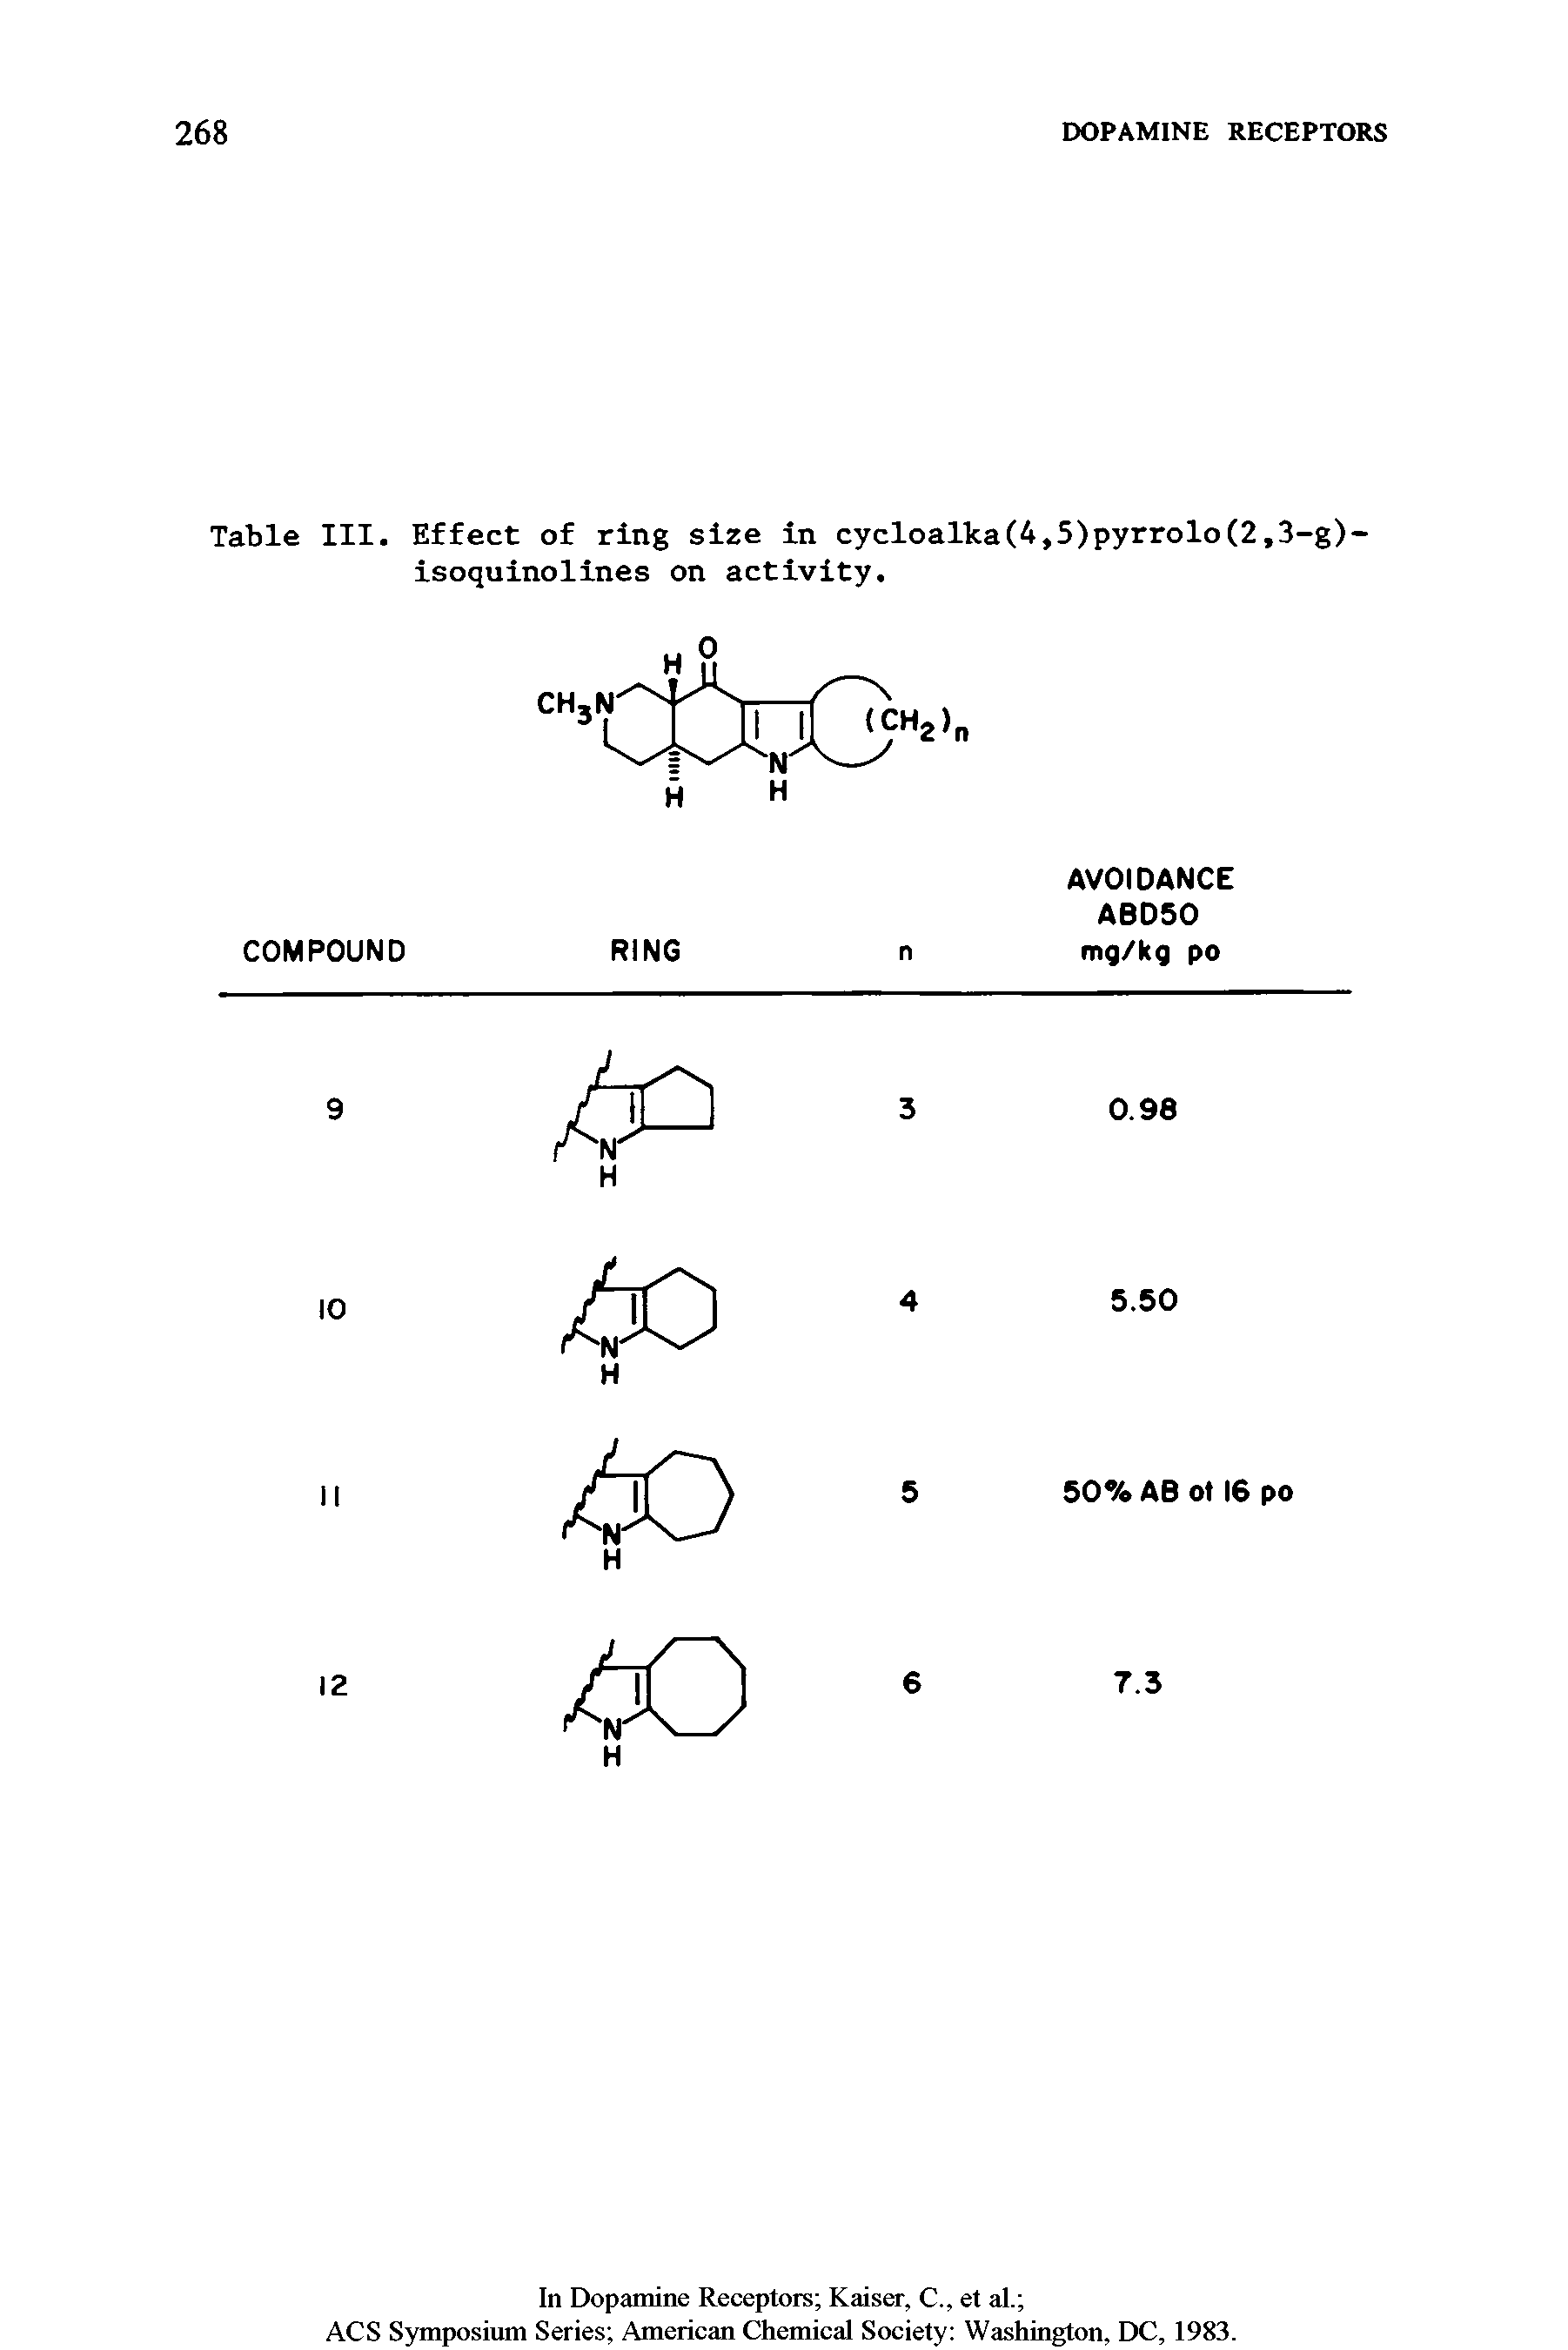 Table III. Effect of ring size In cycloalka(4,5)pyrrolo(2,3-g) isoquinolines on activity.